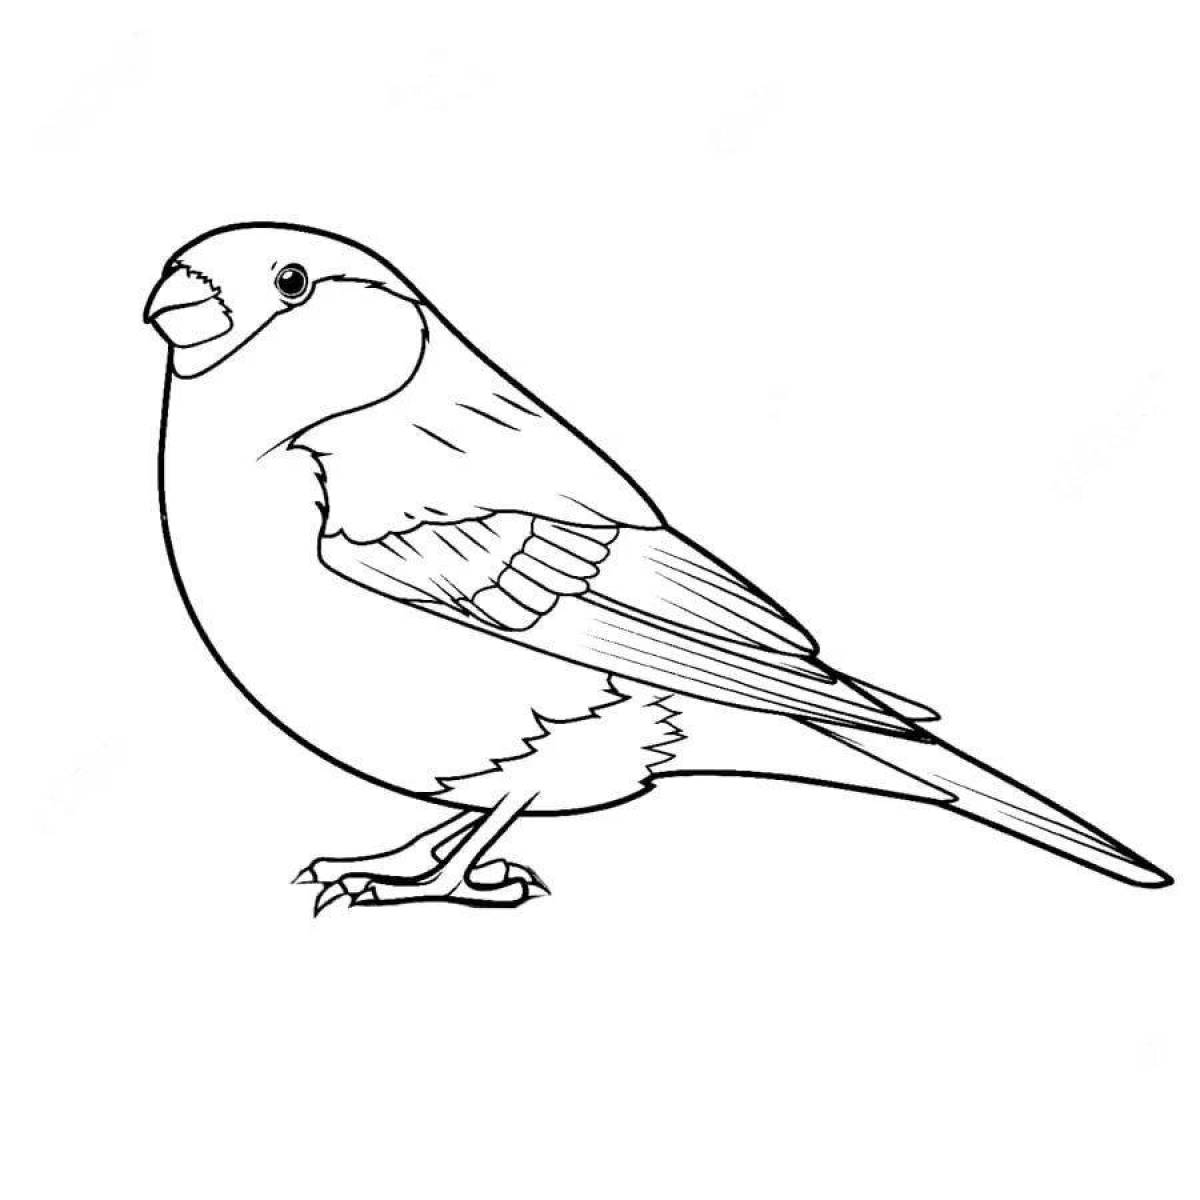 Attractive bullfinch picture for kids